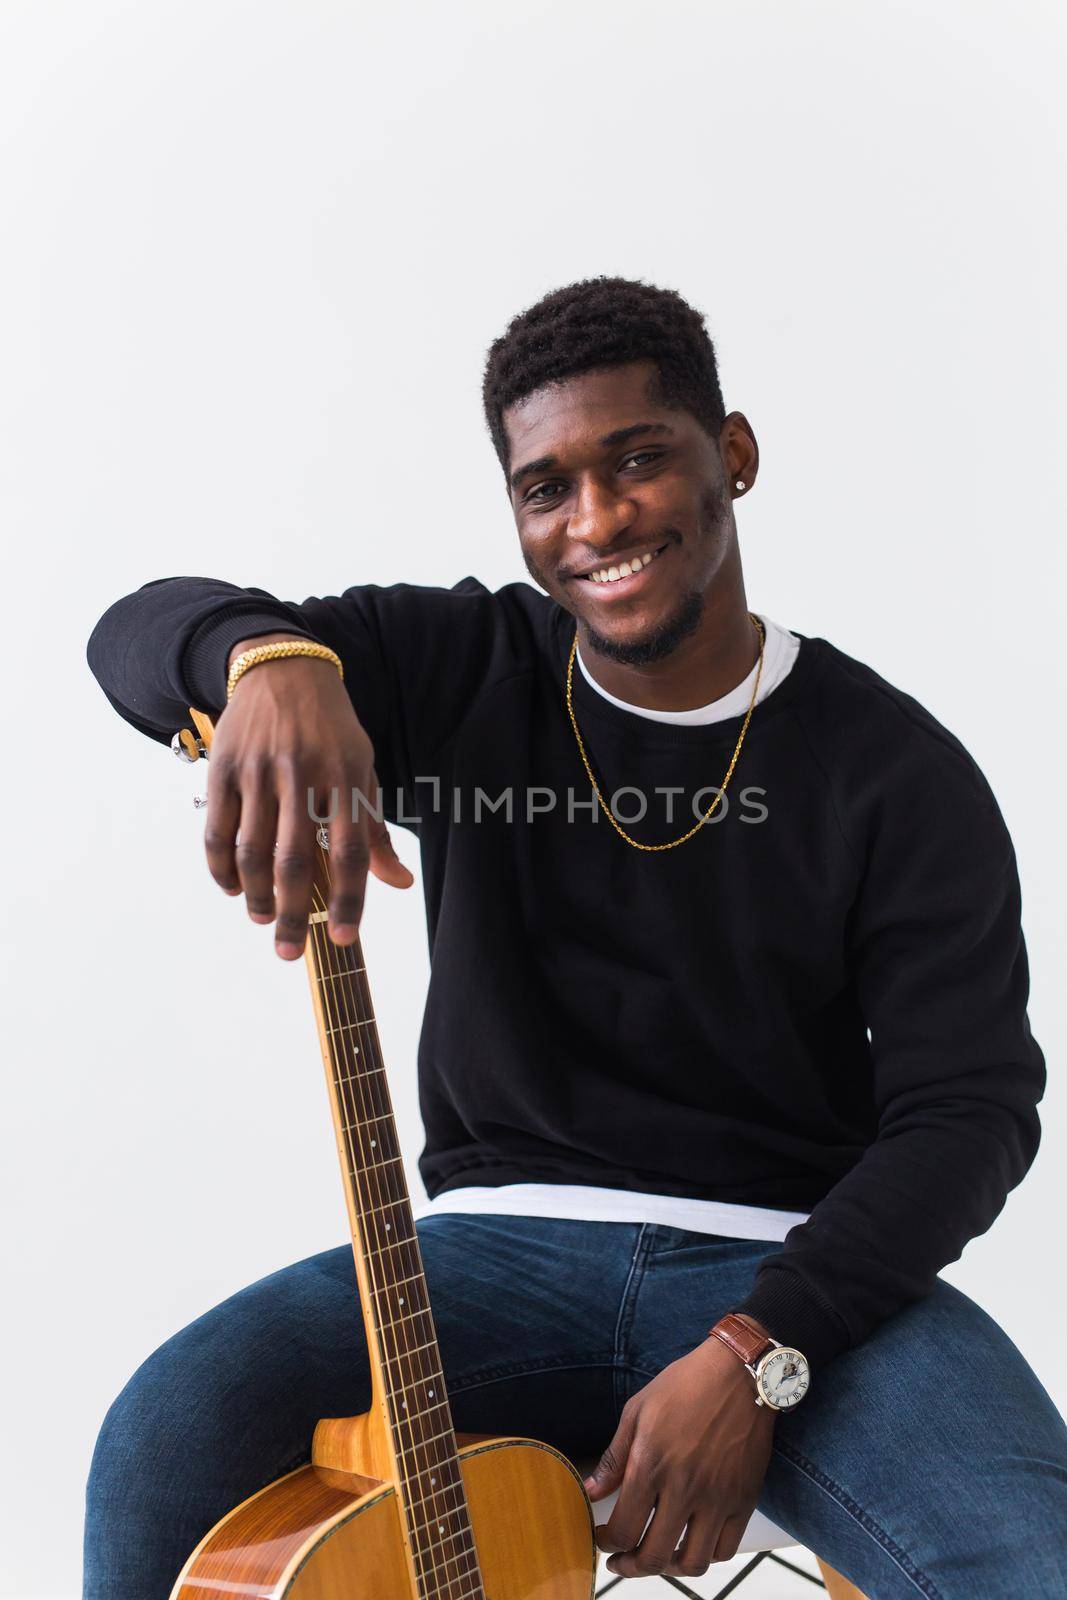 Handsome African American man posing in black sweatshirt with guitar on a white background. Youth street fashion photo with afro hairstyle. by Satura86